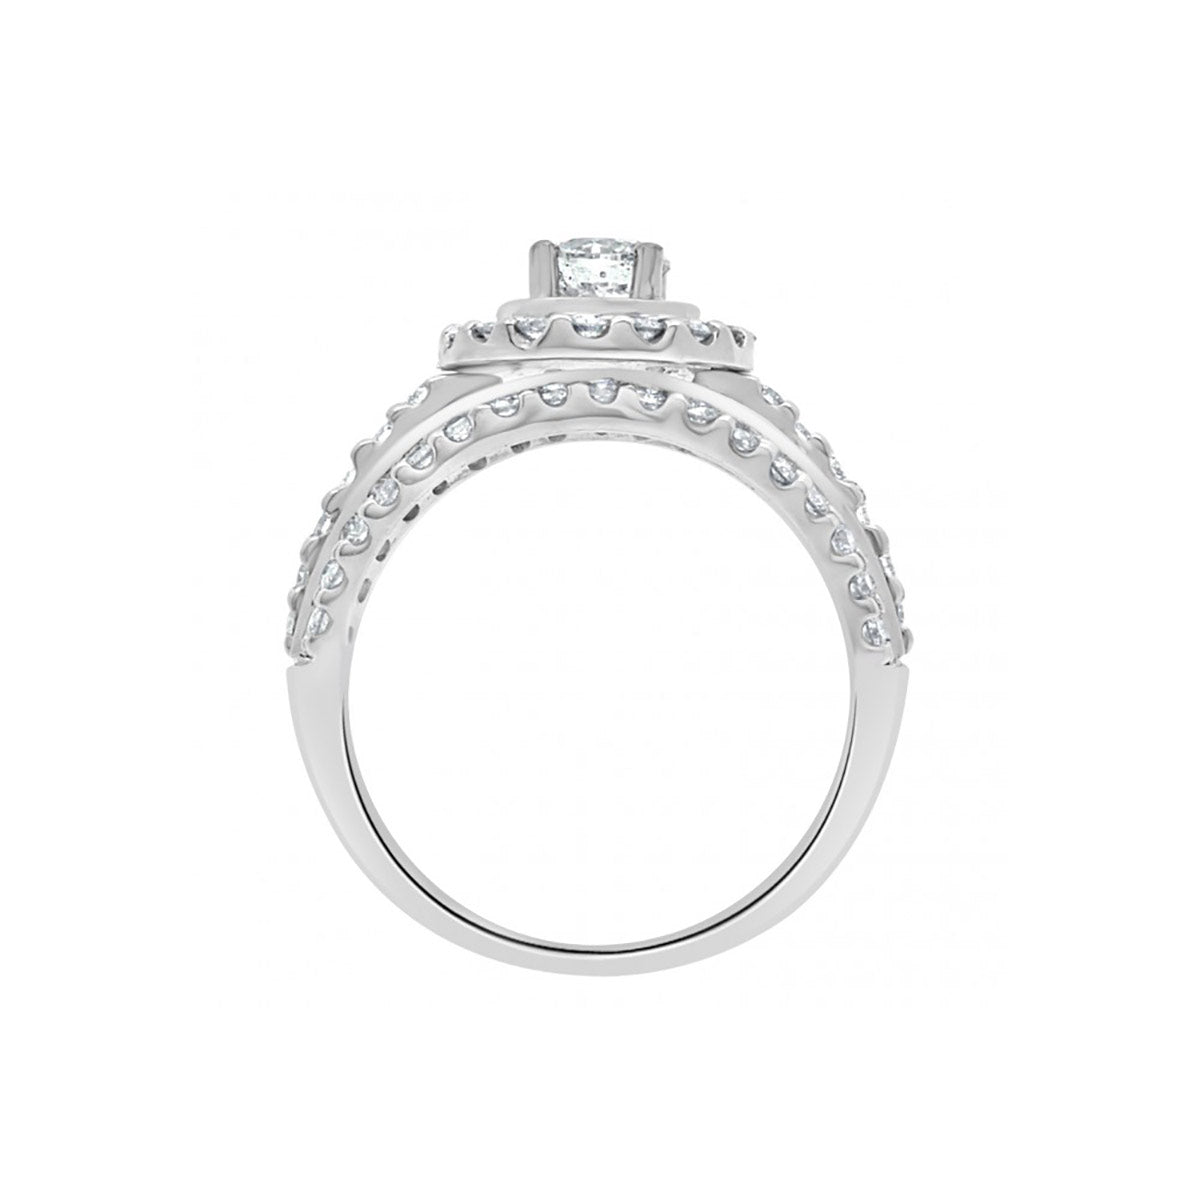 Three Band Engagement Ring in white gold viewed in an upright position